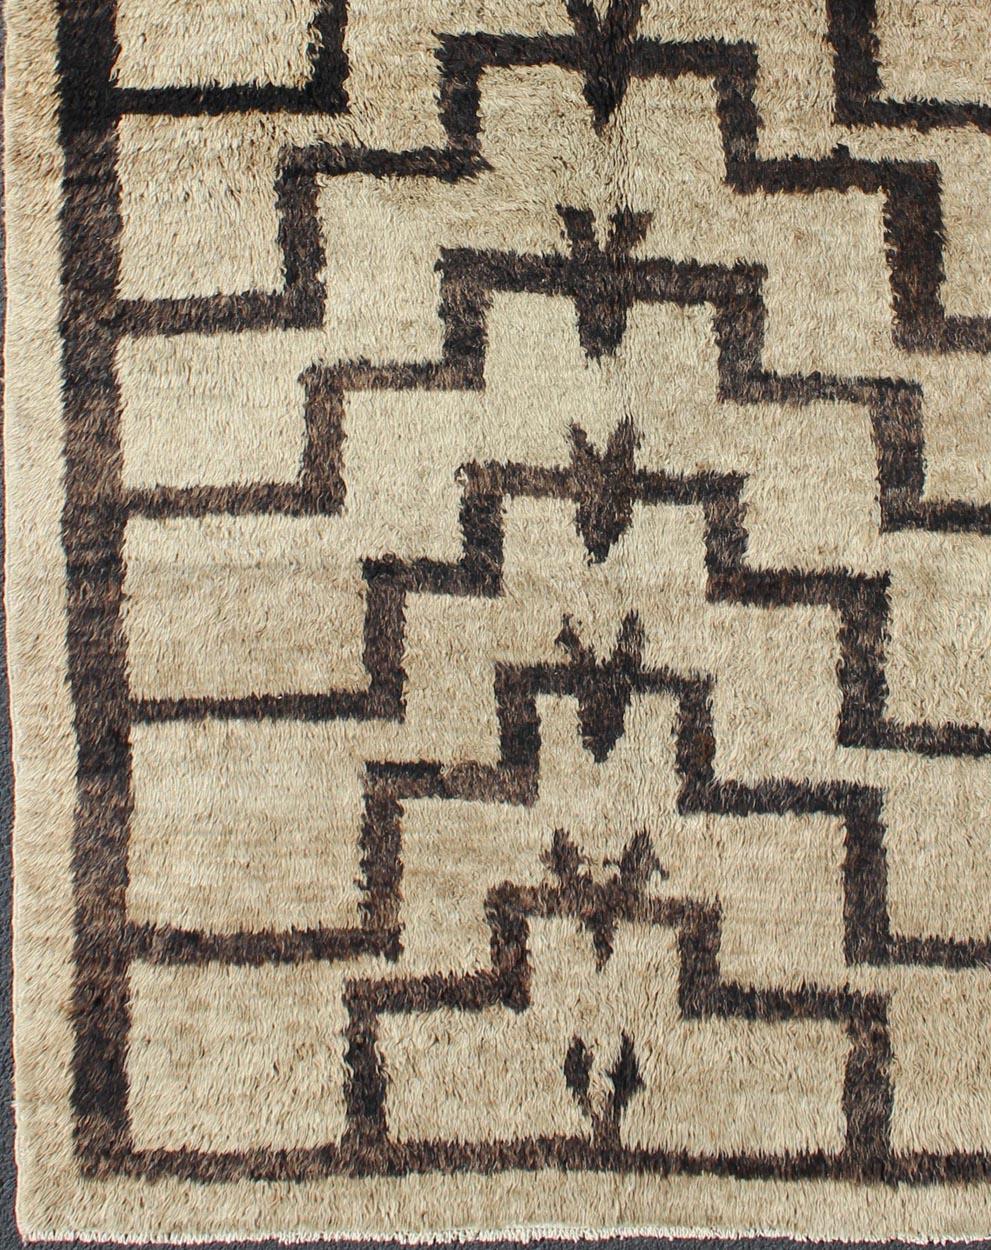 Made with very fine wool and Angora blend, this vintage Turkish Tulu carpet displays Mid-Century Modern design with connected Tribal pattern in brown and cream, Rug EN-3312 Keivan Woven Arts /  country of origin / type: Turkey / Tulu circa mid-20th